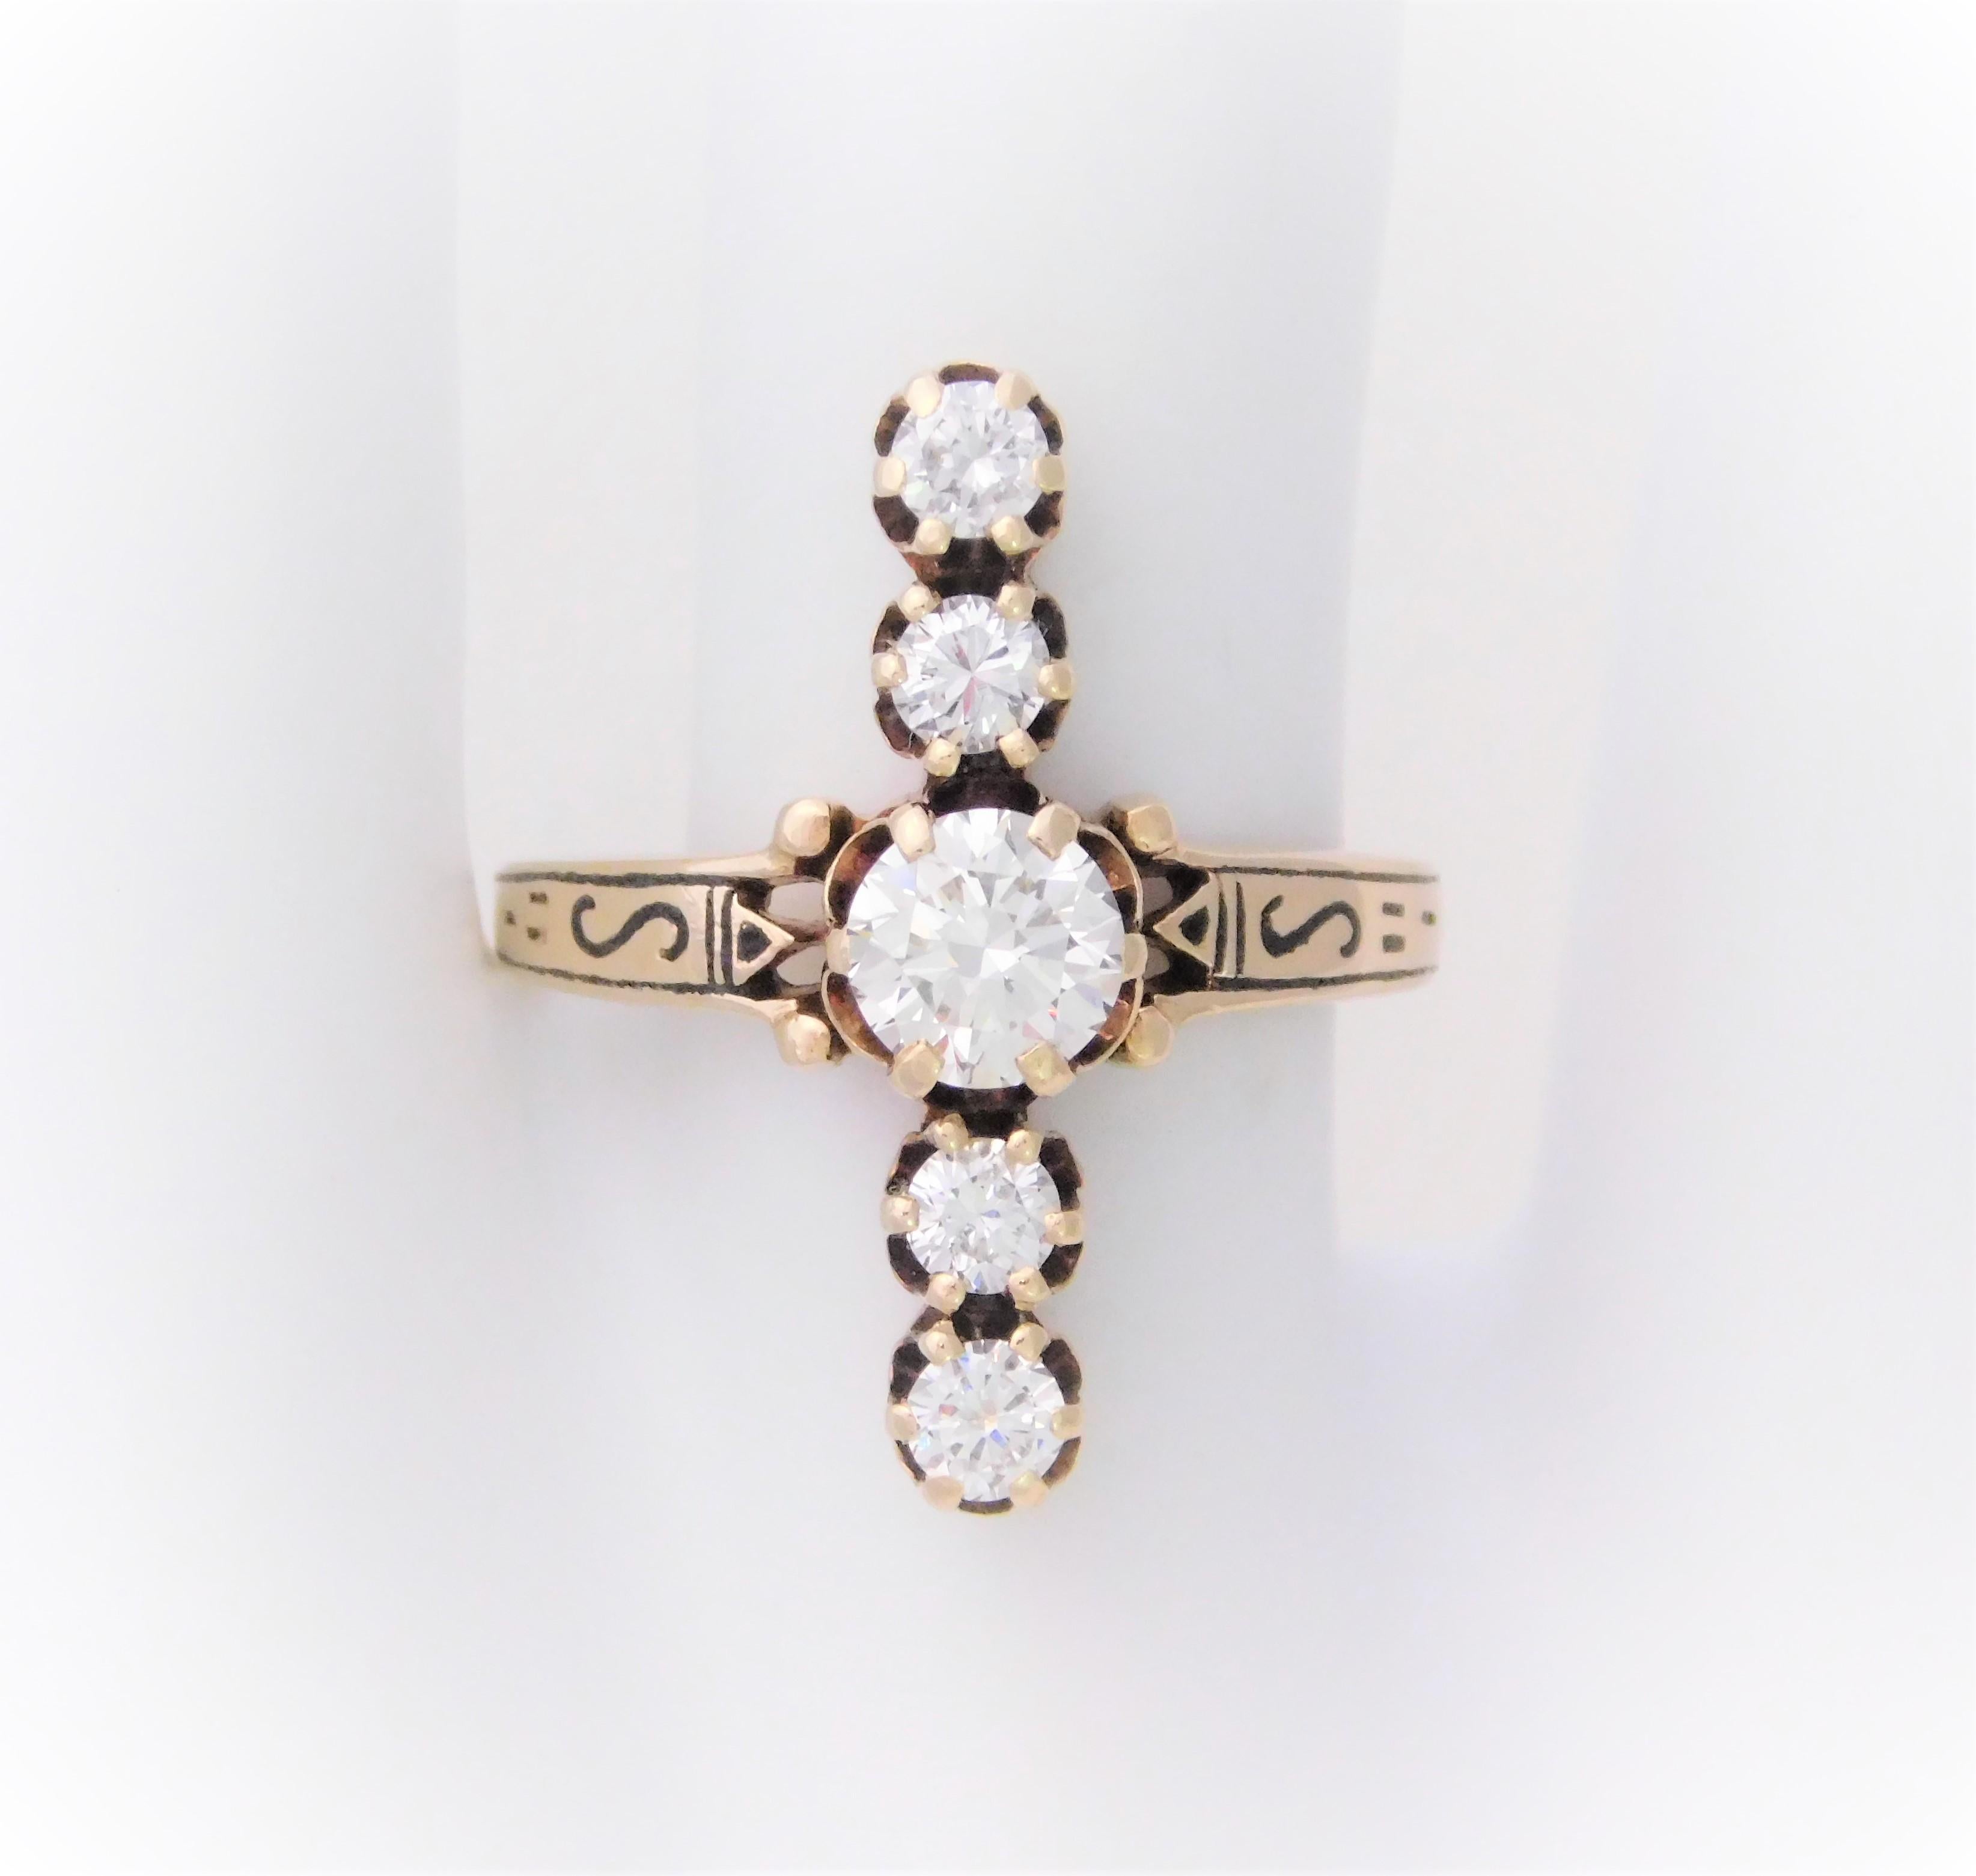 Unique Midcentury 1.22 Carat Diamond “Line” Cocktail Ring In Excellent Condition For Sale In Metairie, LA